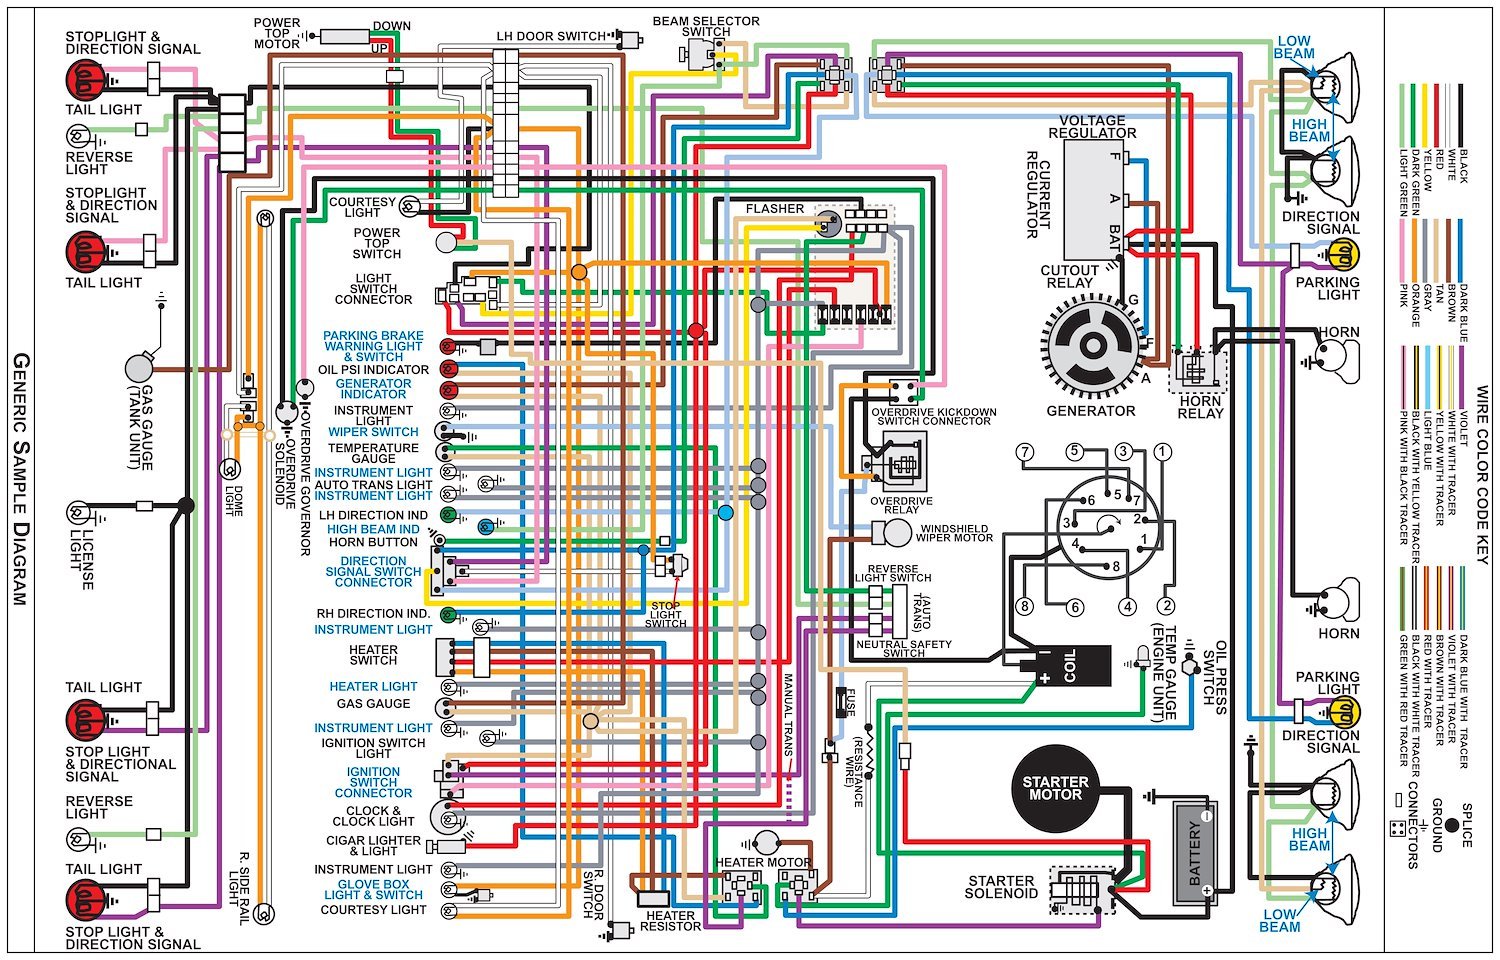 Wiring Diagram for 1974 Plymouth Barracuda with Rallye Dash, 11 in x 17 in., Laminated